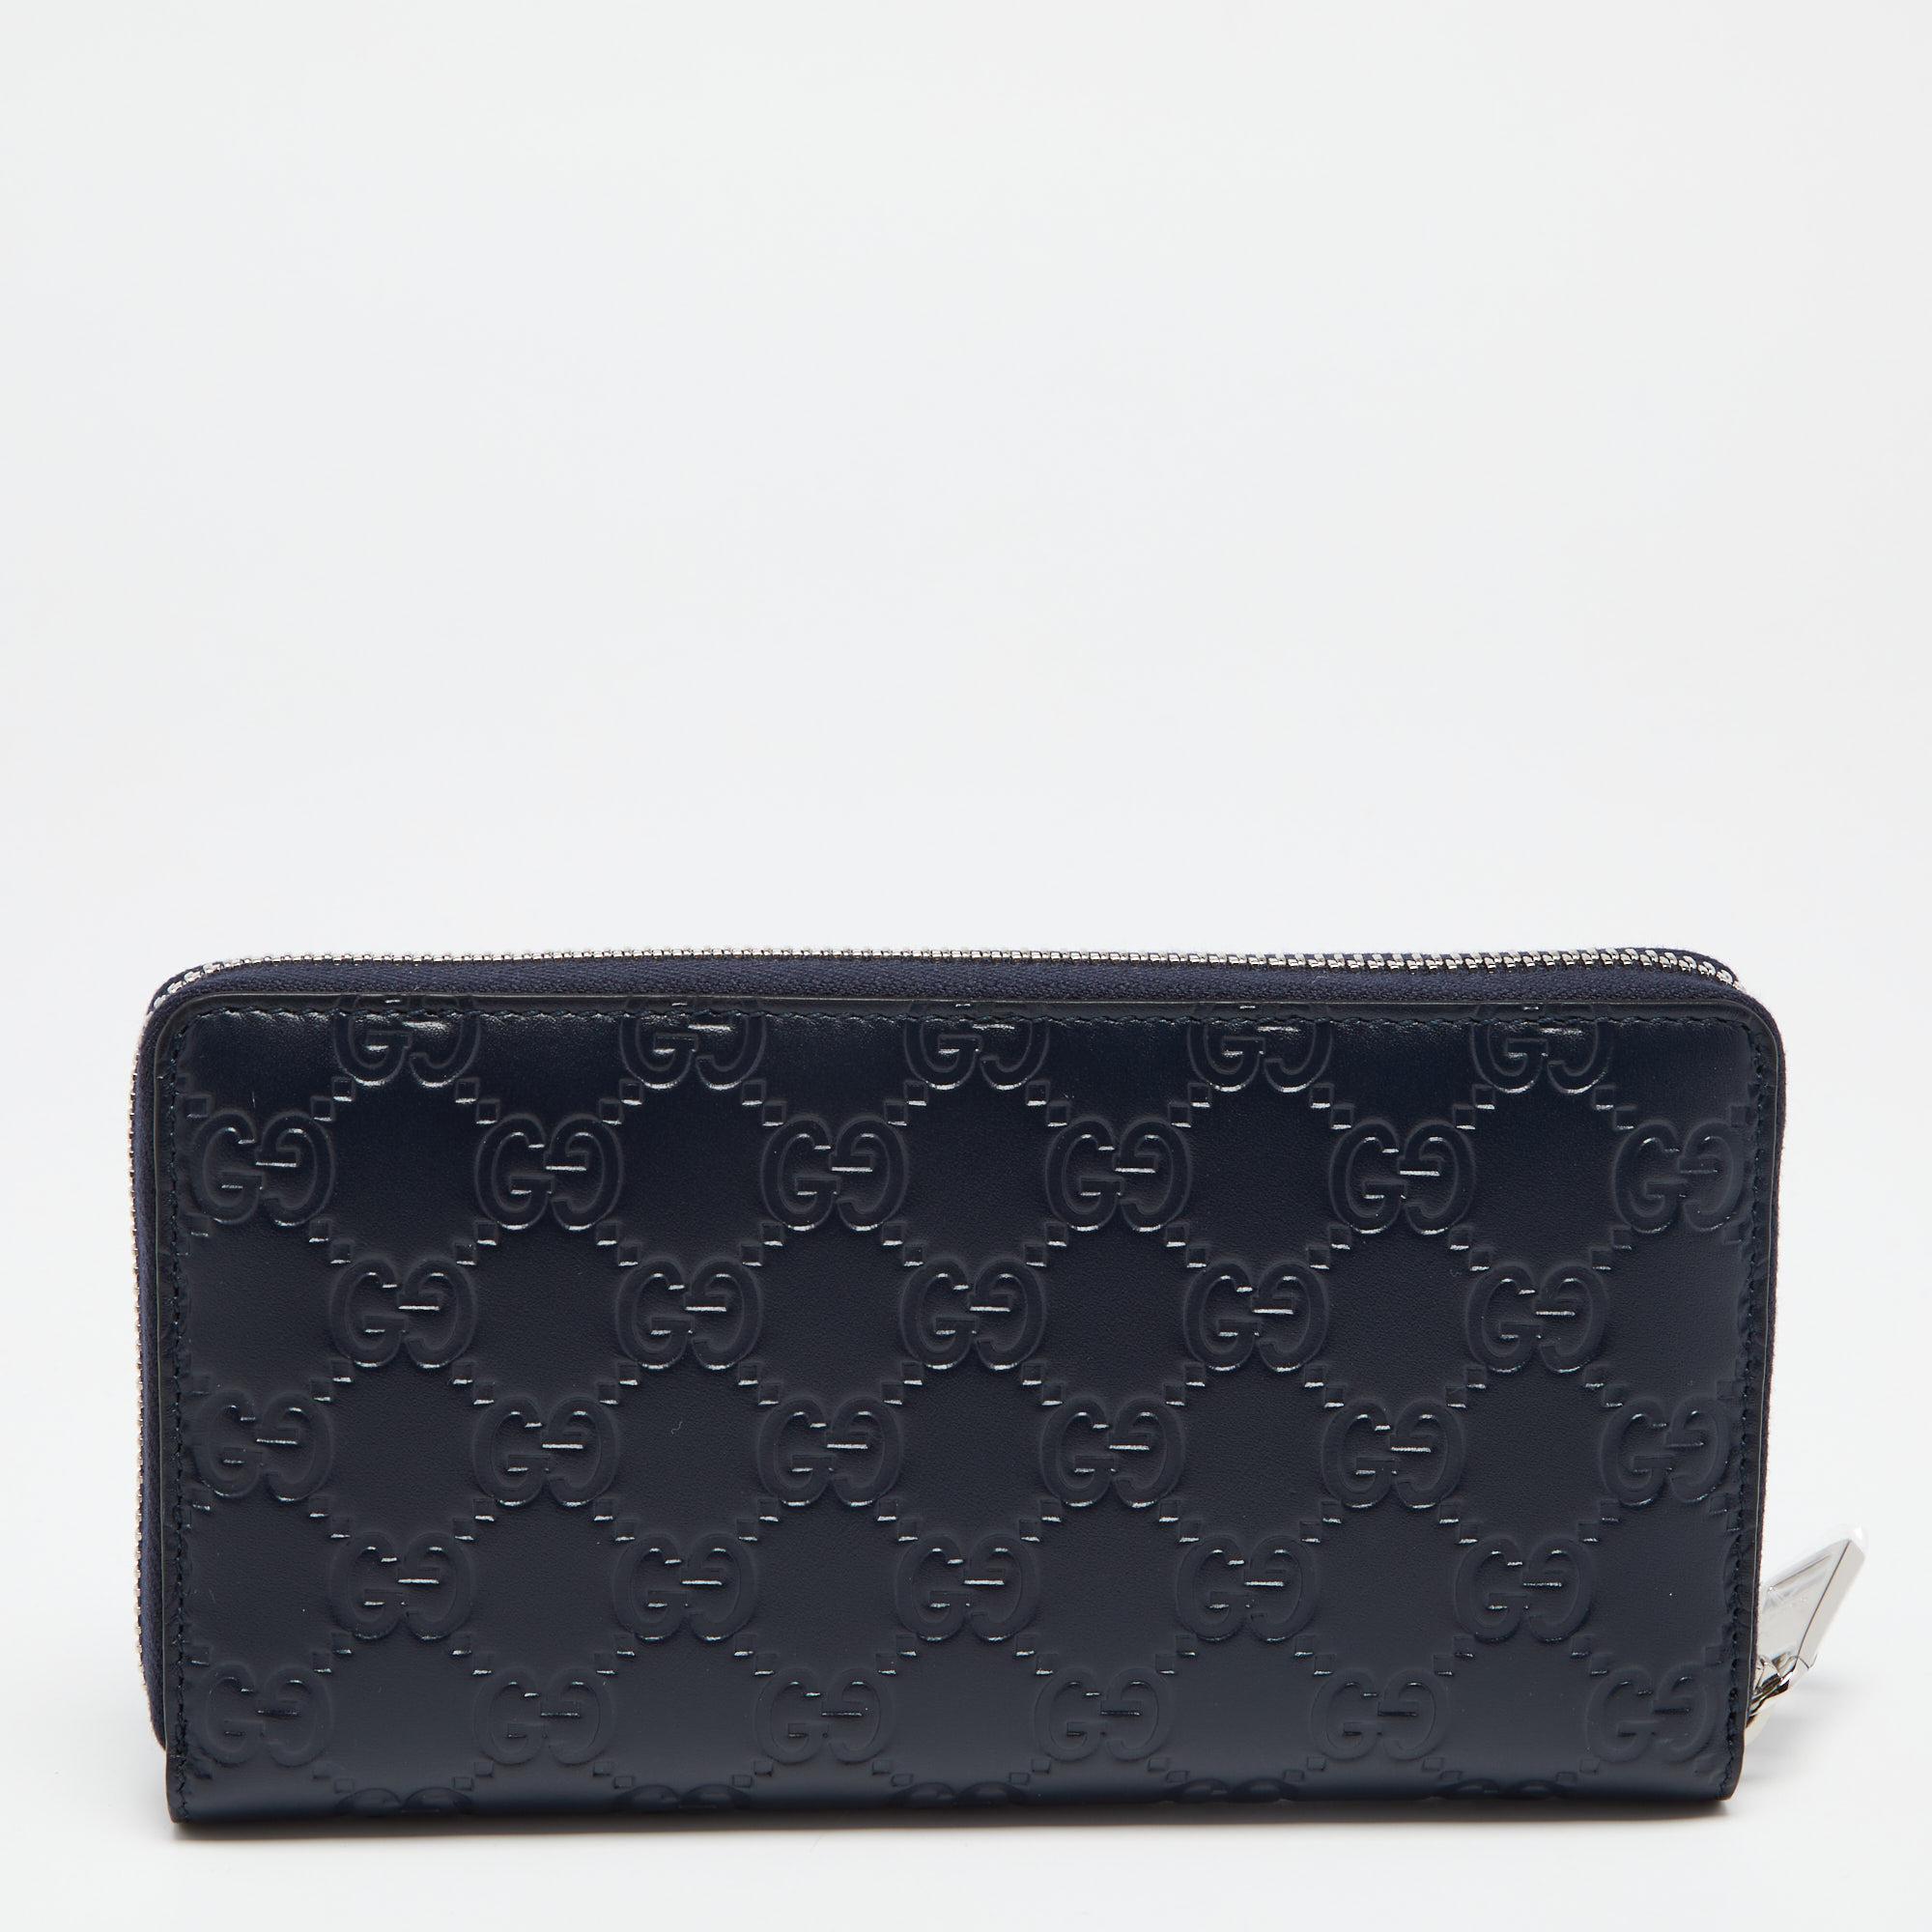 Lend your outfit the signature aesthetics of Gucci by carrying this wallet. Created from Guccissima leather, it features a zip-around closure, a brand signature on the front, and silver-tone hardware. The nylon and leather interior is divided into